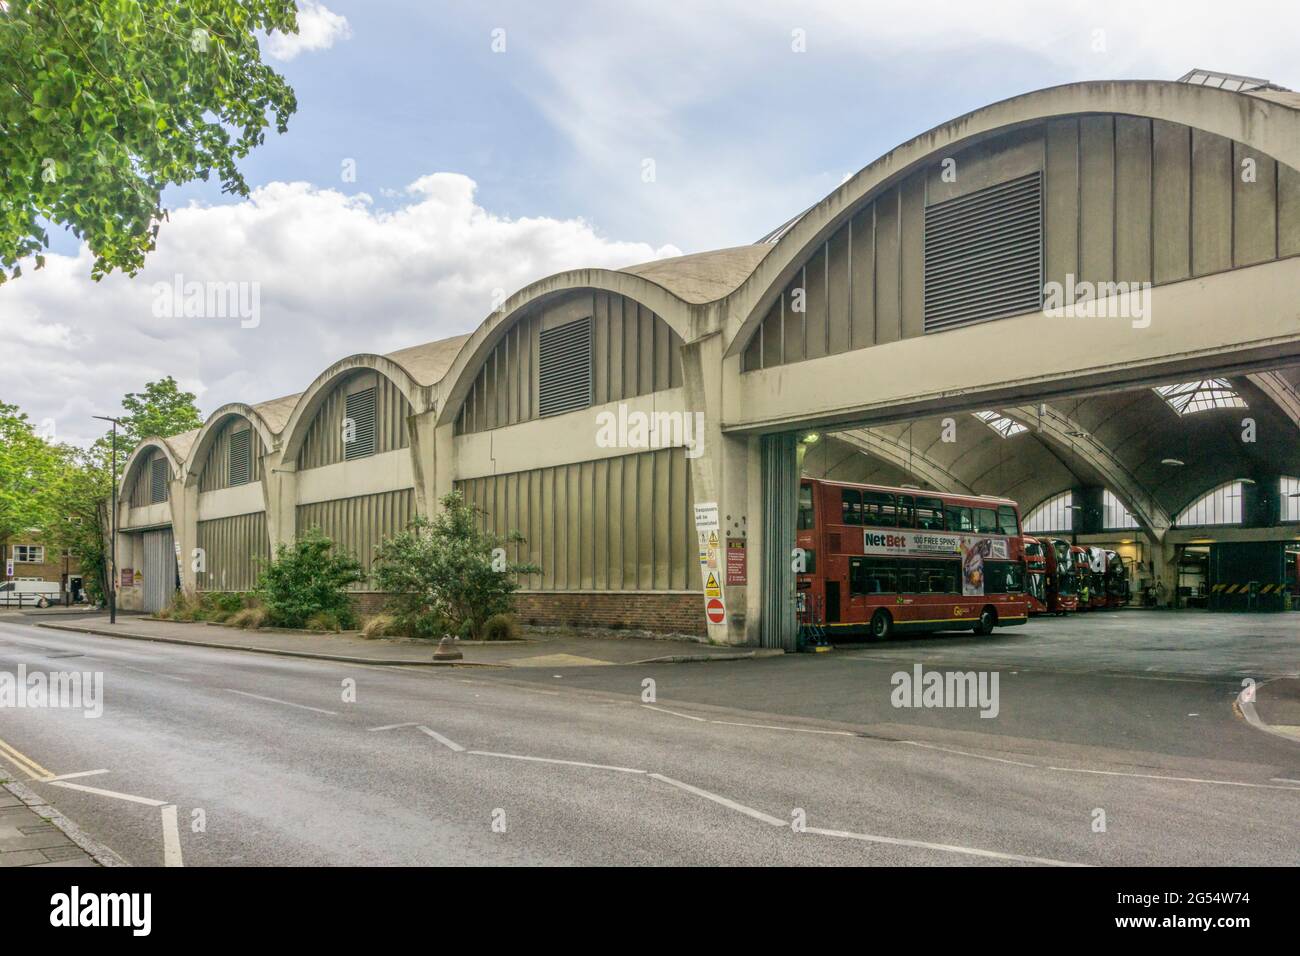 The Grade II * listed, reinforced concrete Stockwell bus garage had Europe's largest unsupported roof span when it opened in 1952. Stock Photo